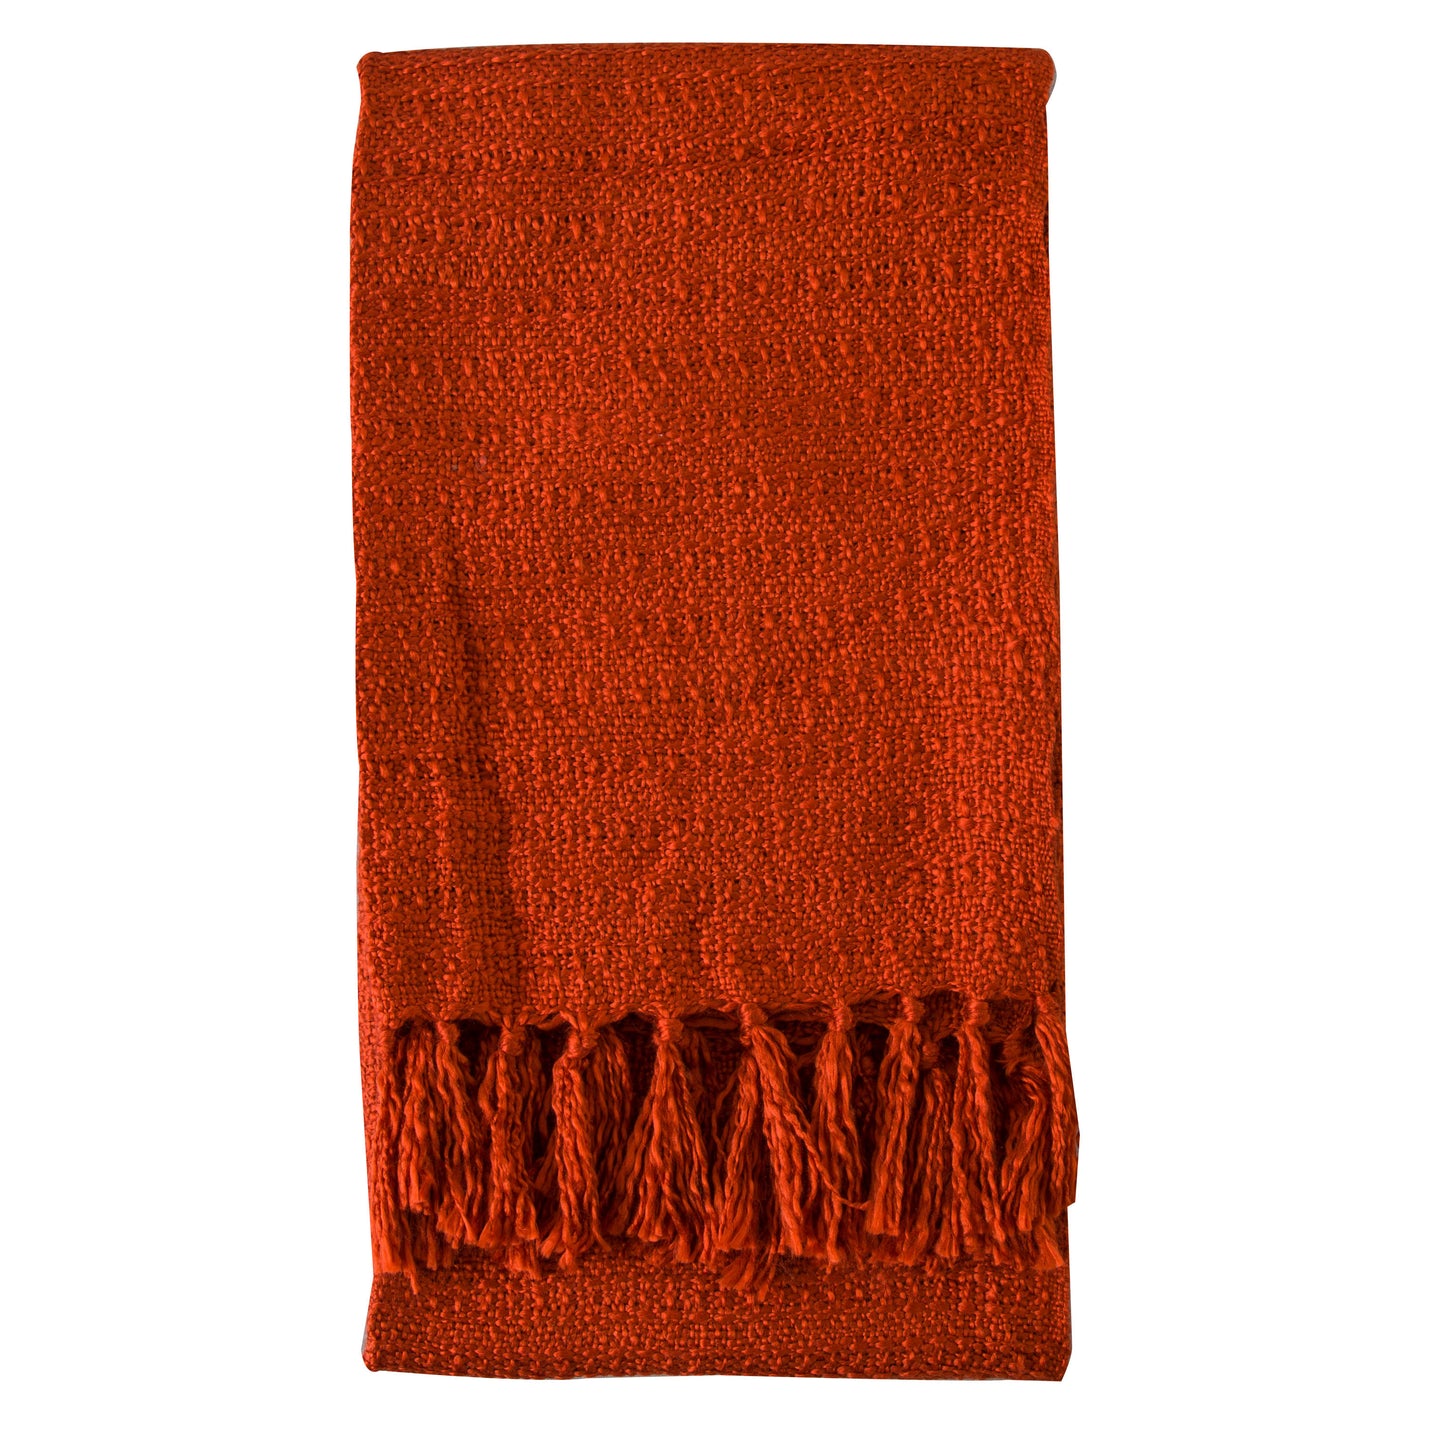 A Kikiathome.co.uk Acrylic Textured Throw Sienna 1300x1700mm with fringes perfect for interior decor.